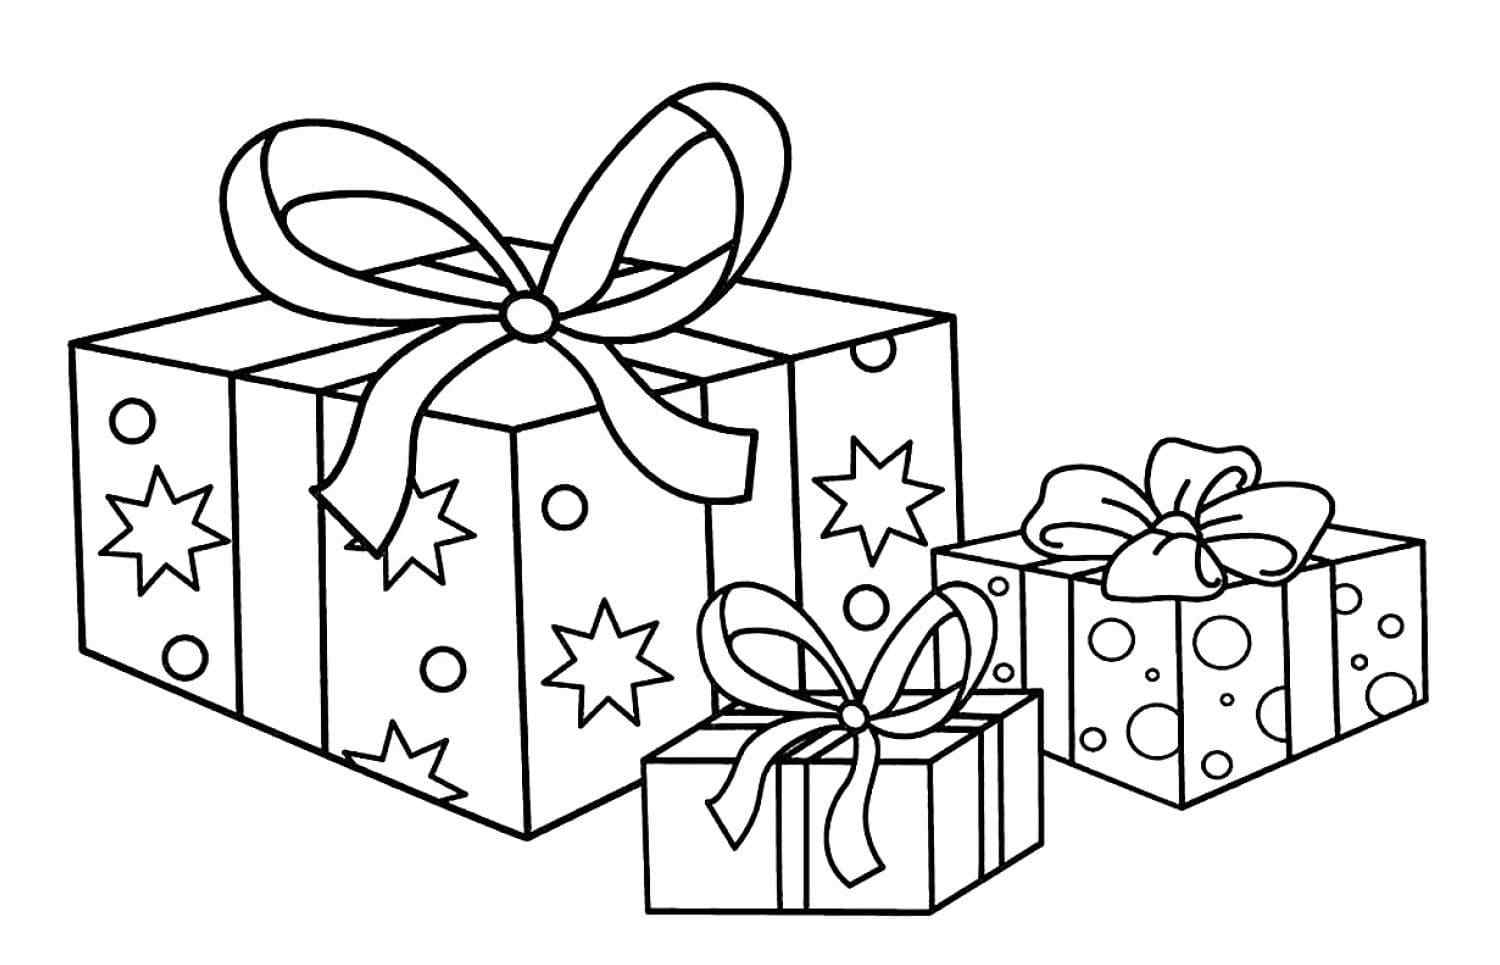 Integral Symbols Of The New Year And Christmas Coloring Page